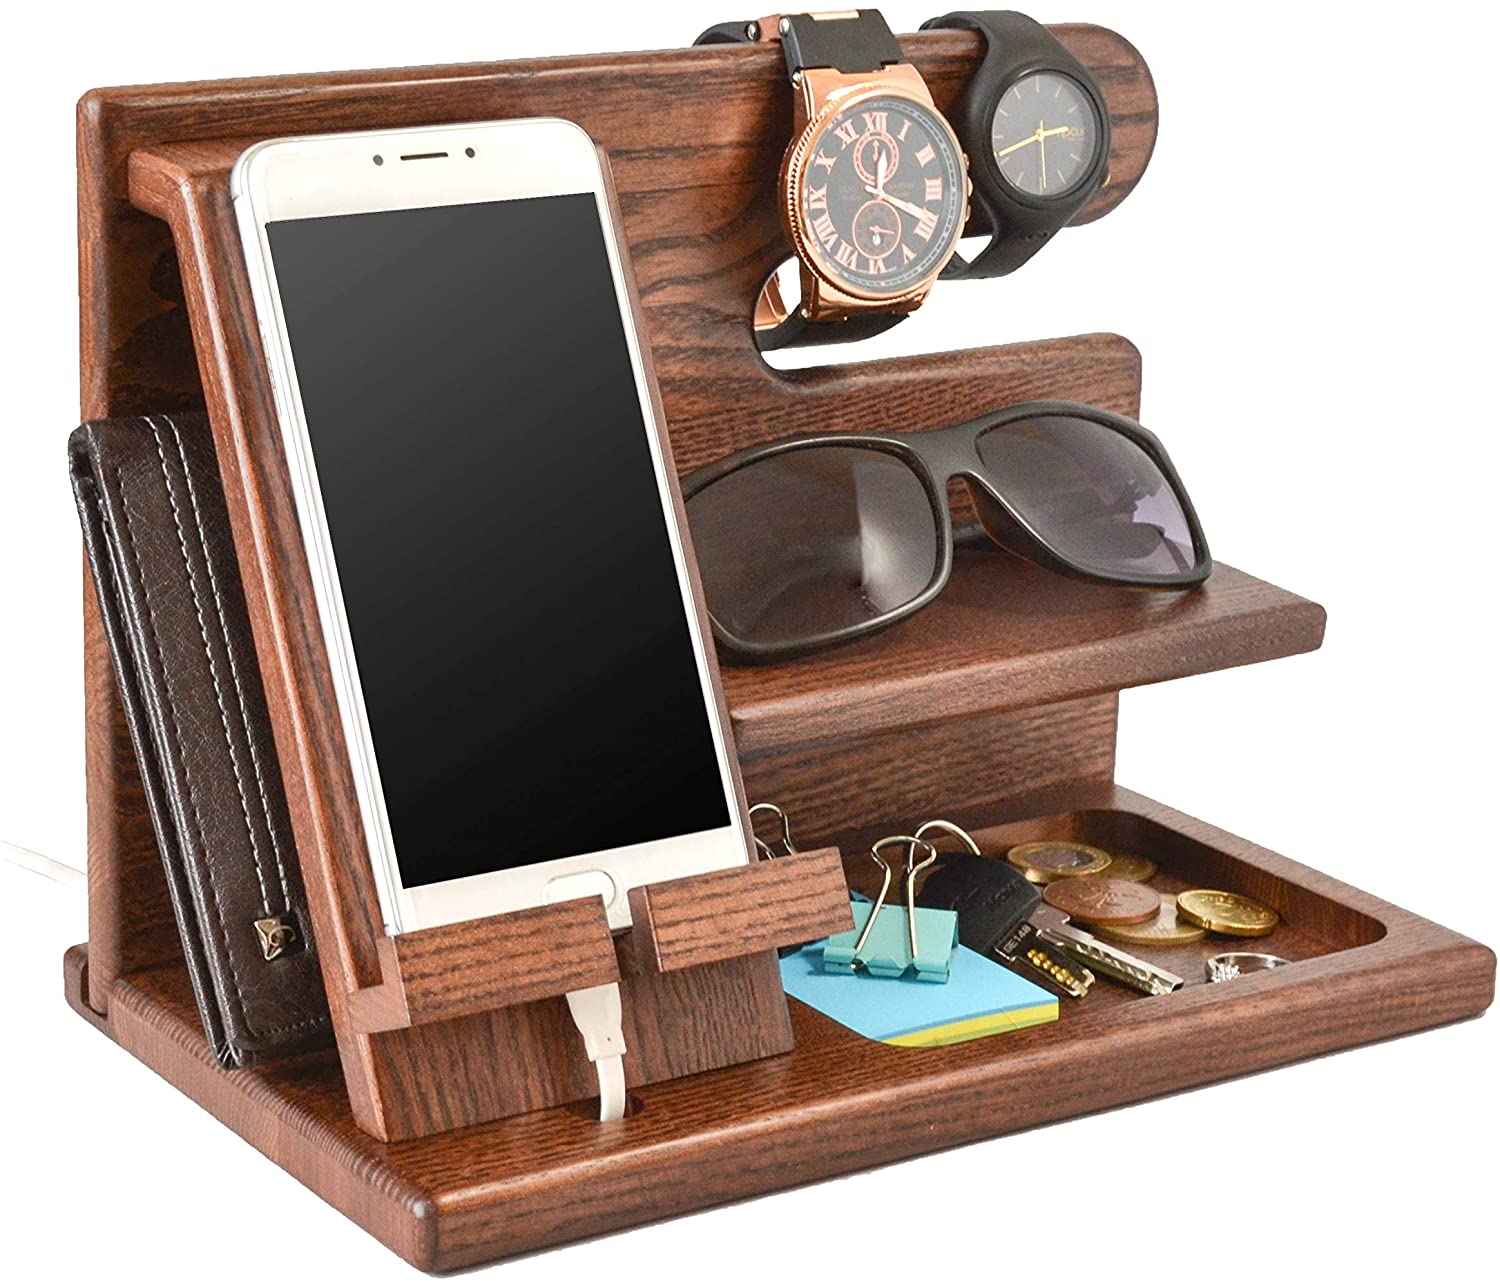 Laser Cut Phone Docking Station Ash Key Holder Wallet Stand Watch Organizer Men Gift For Husband Father Free Vector